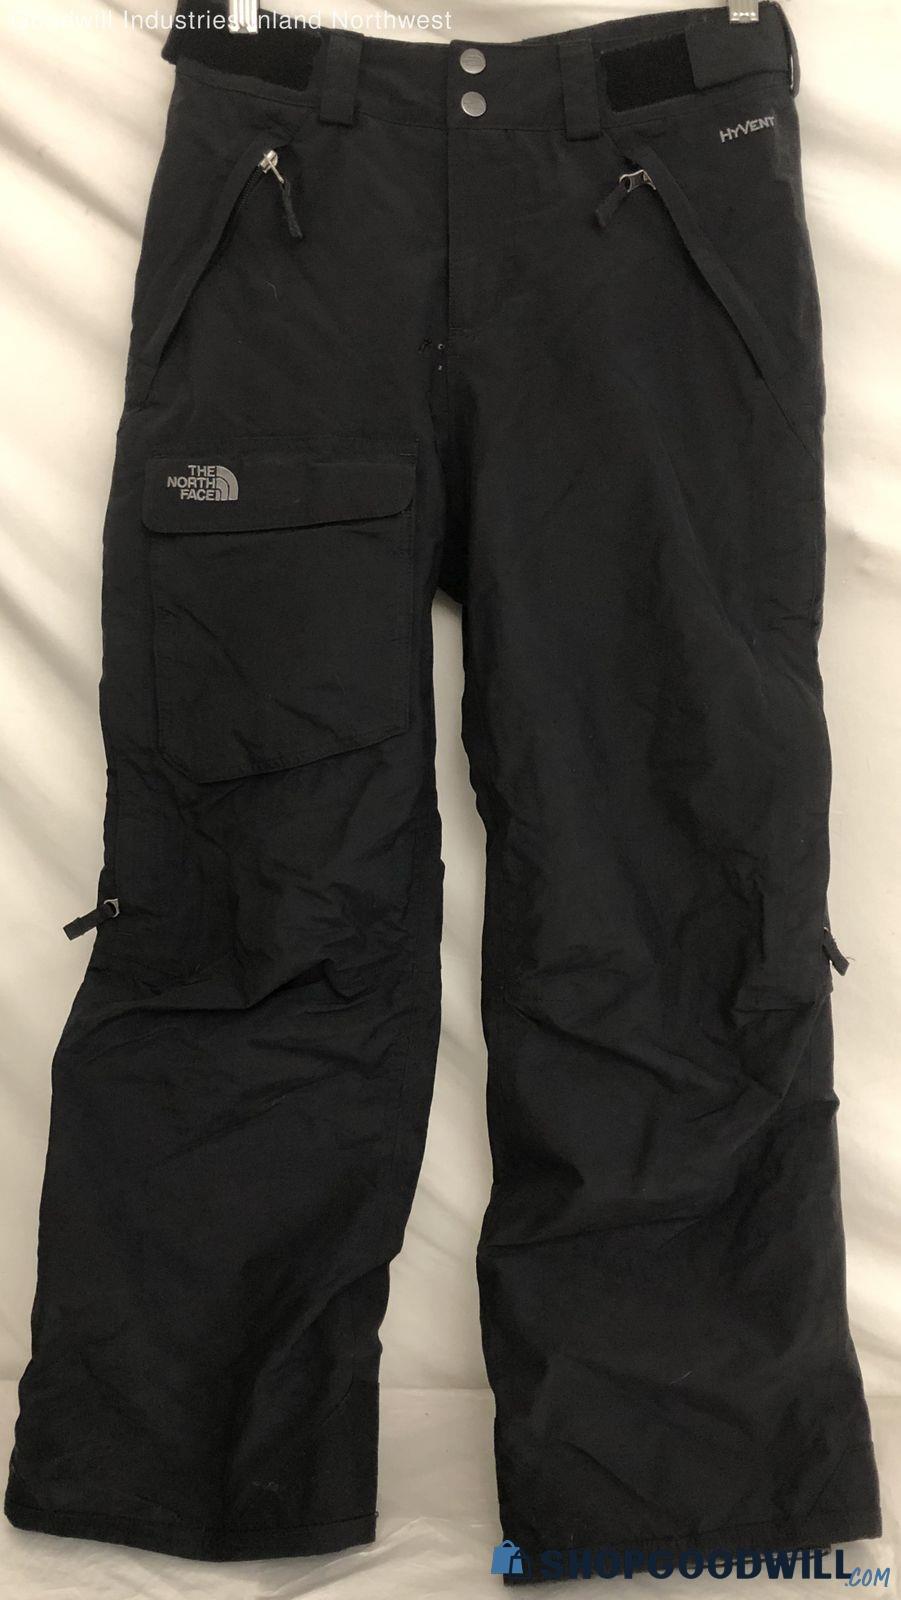 Women's The North Face Hyvent Ski Snowboarding Winter Athletic Pants ...